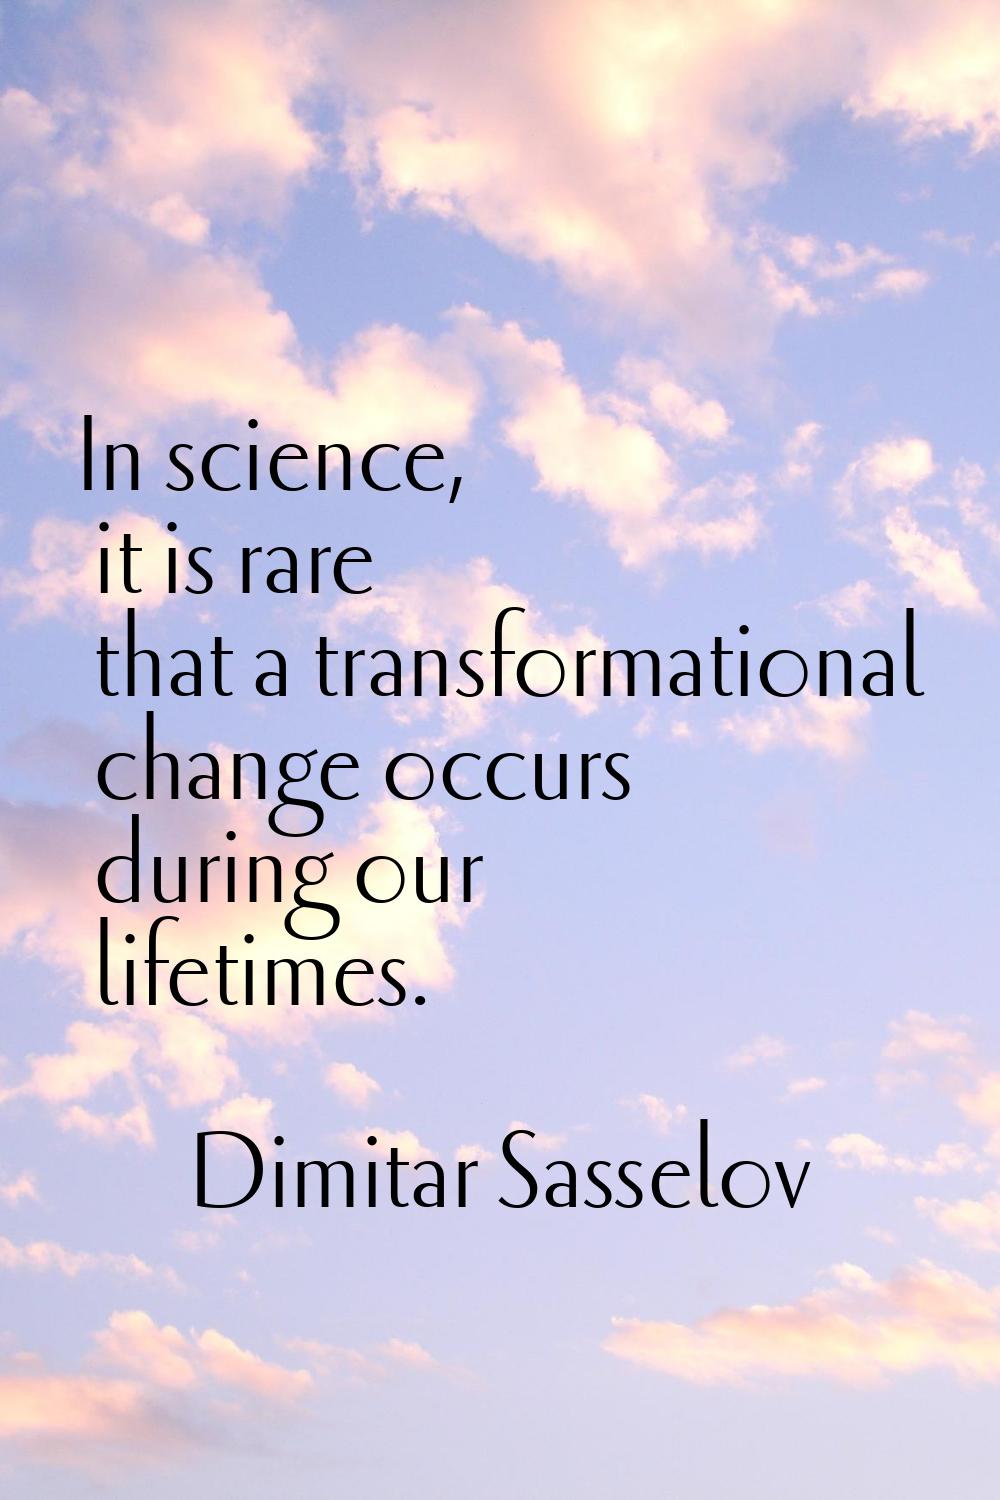 In science, it is rare that a transformational change occurs during our lifetimes.